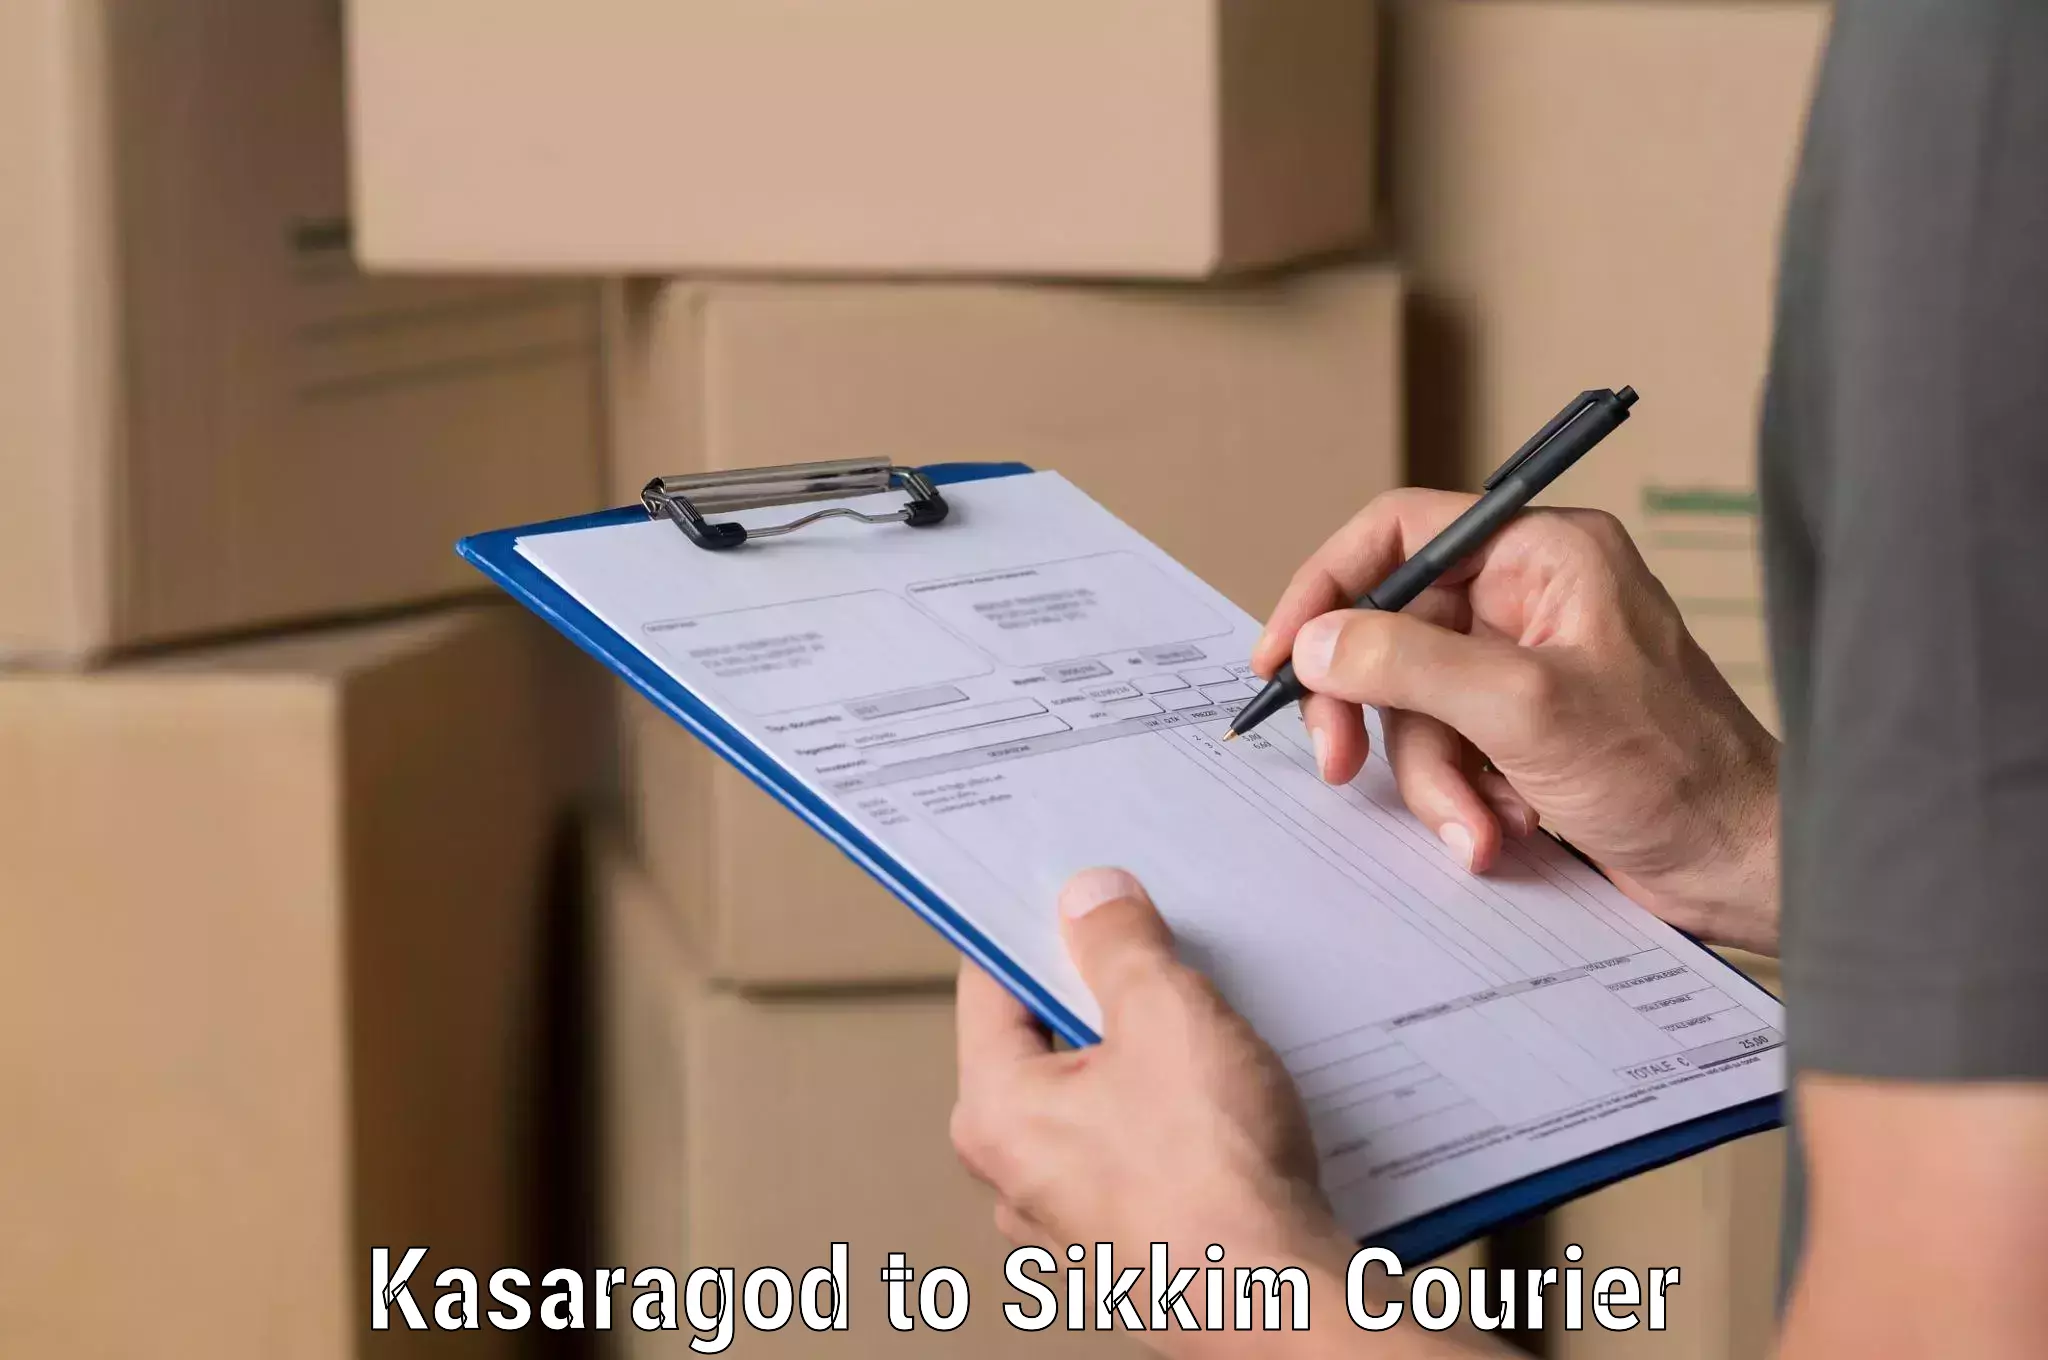 Advanced tracking systems in Kasaragod to Sikkim